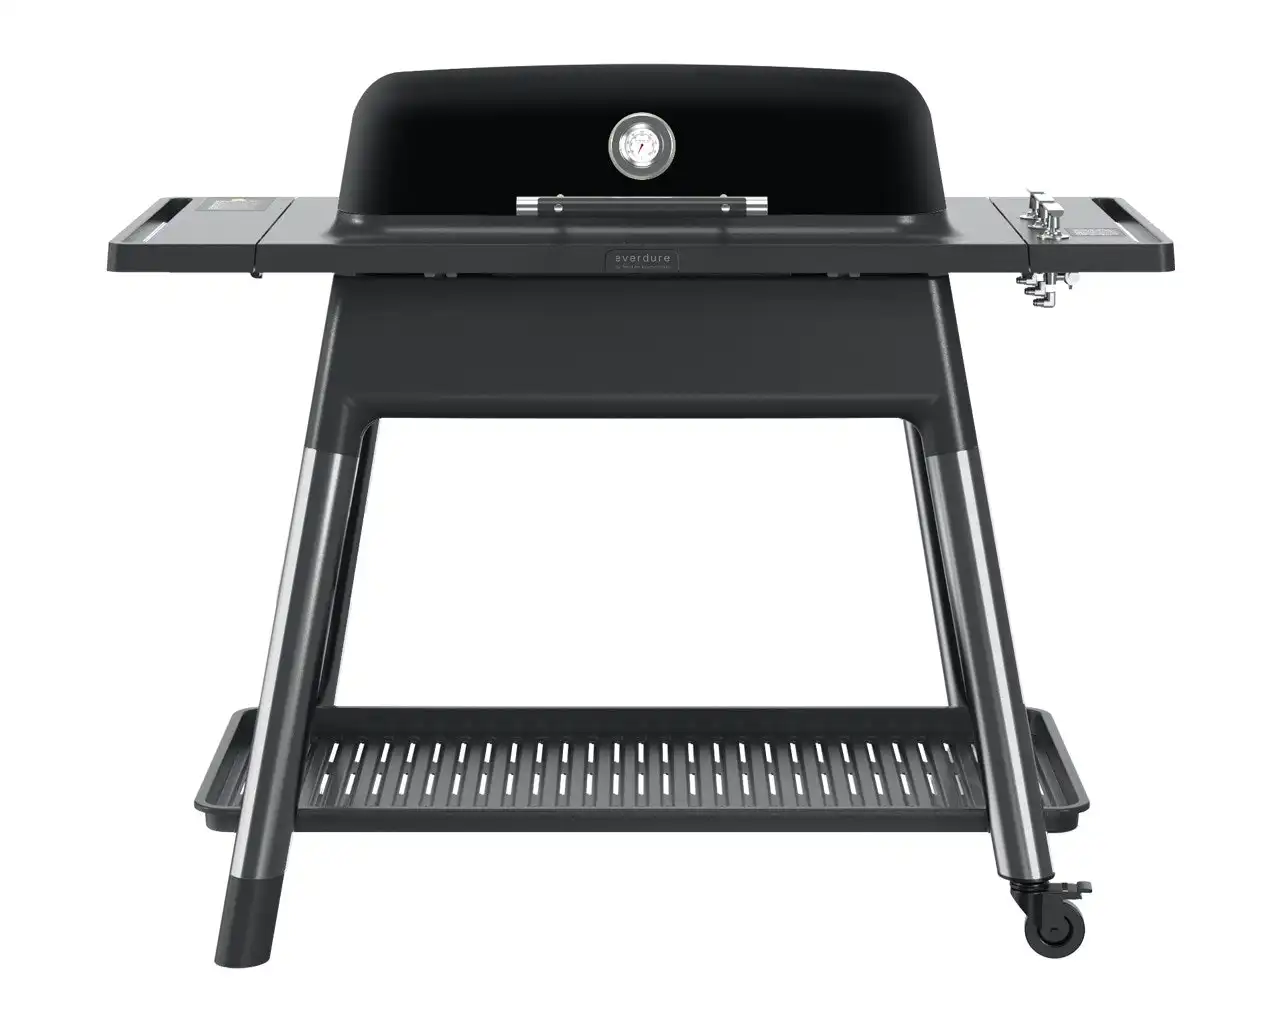 Everdure by Heston Blumenthal FURNACE 3 Burner BBQ with Stand (Black)